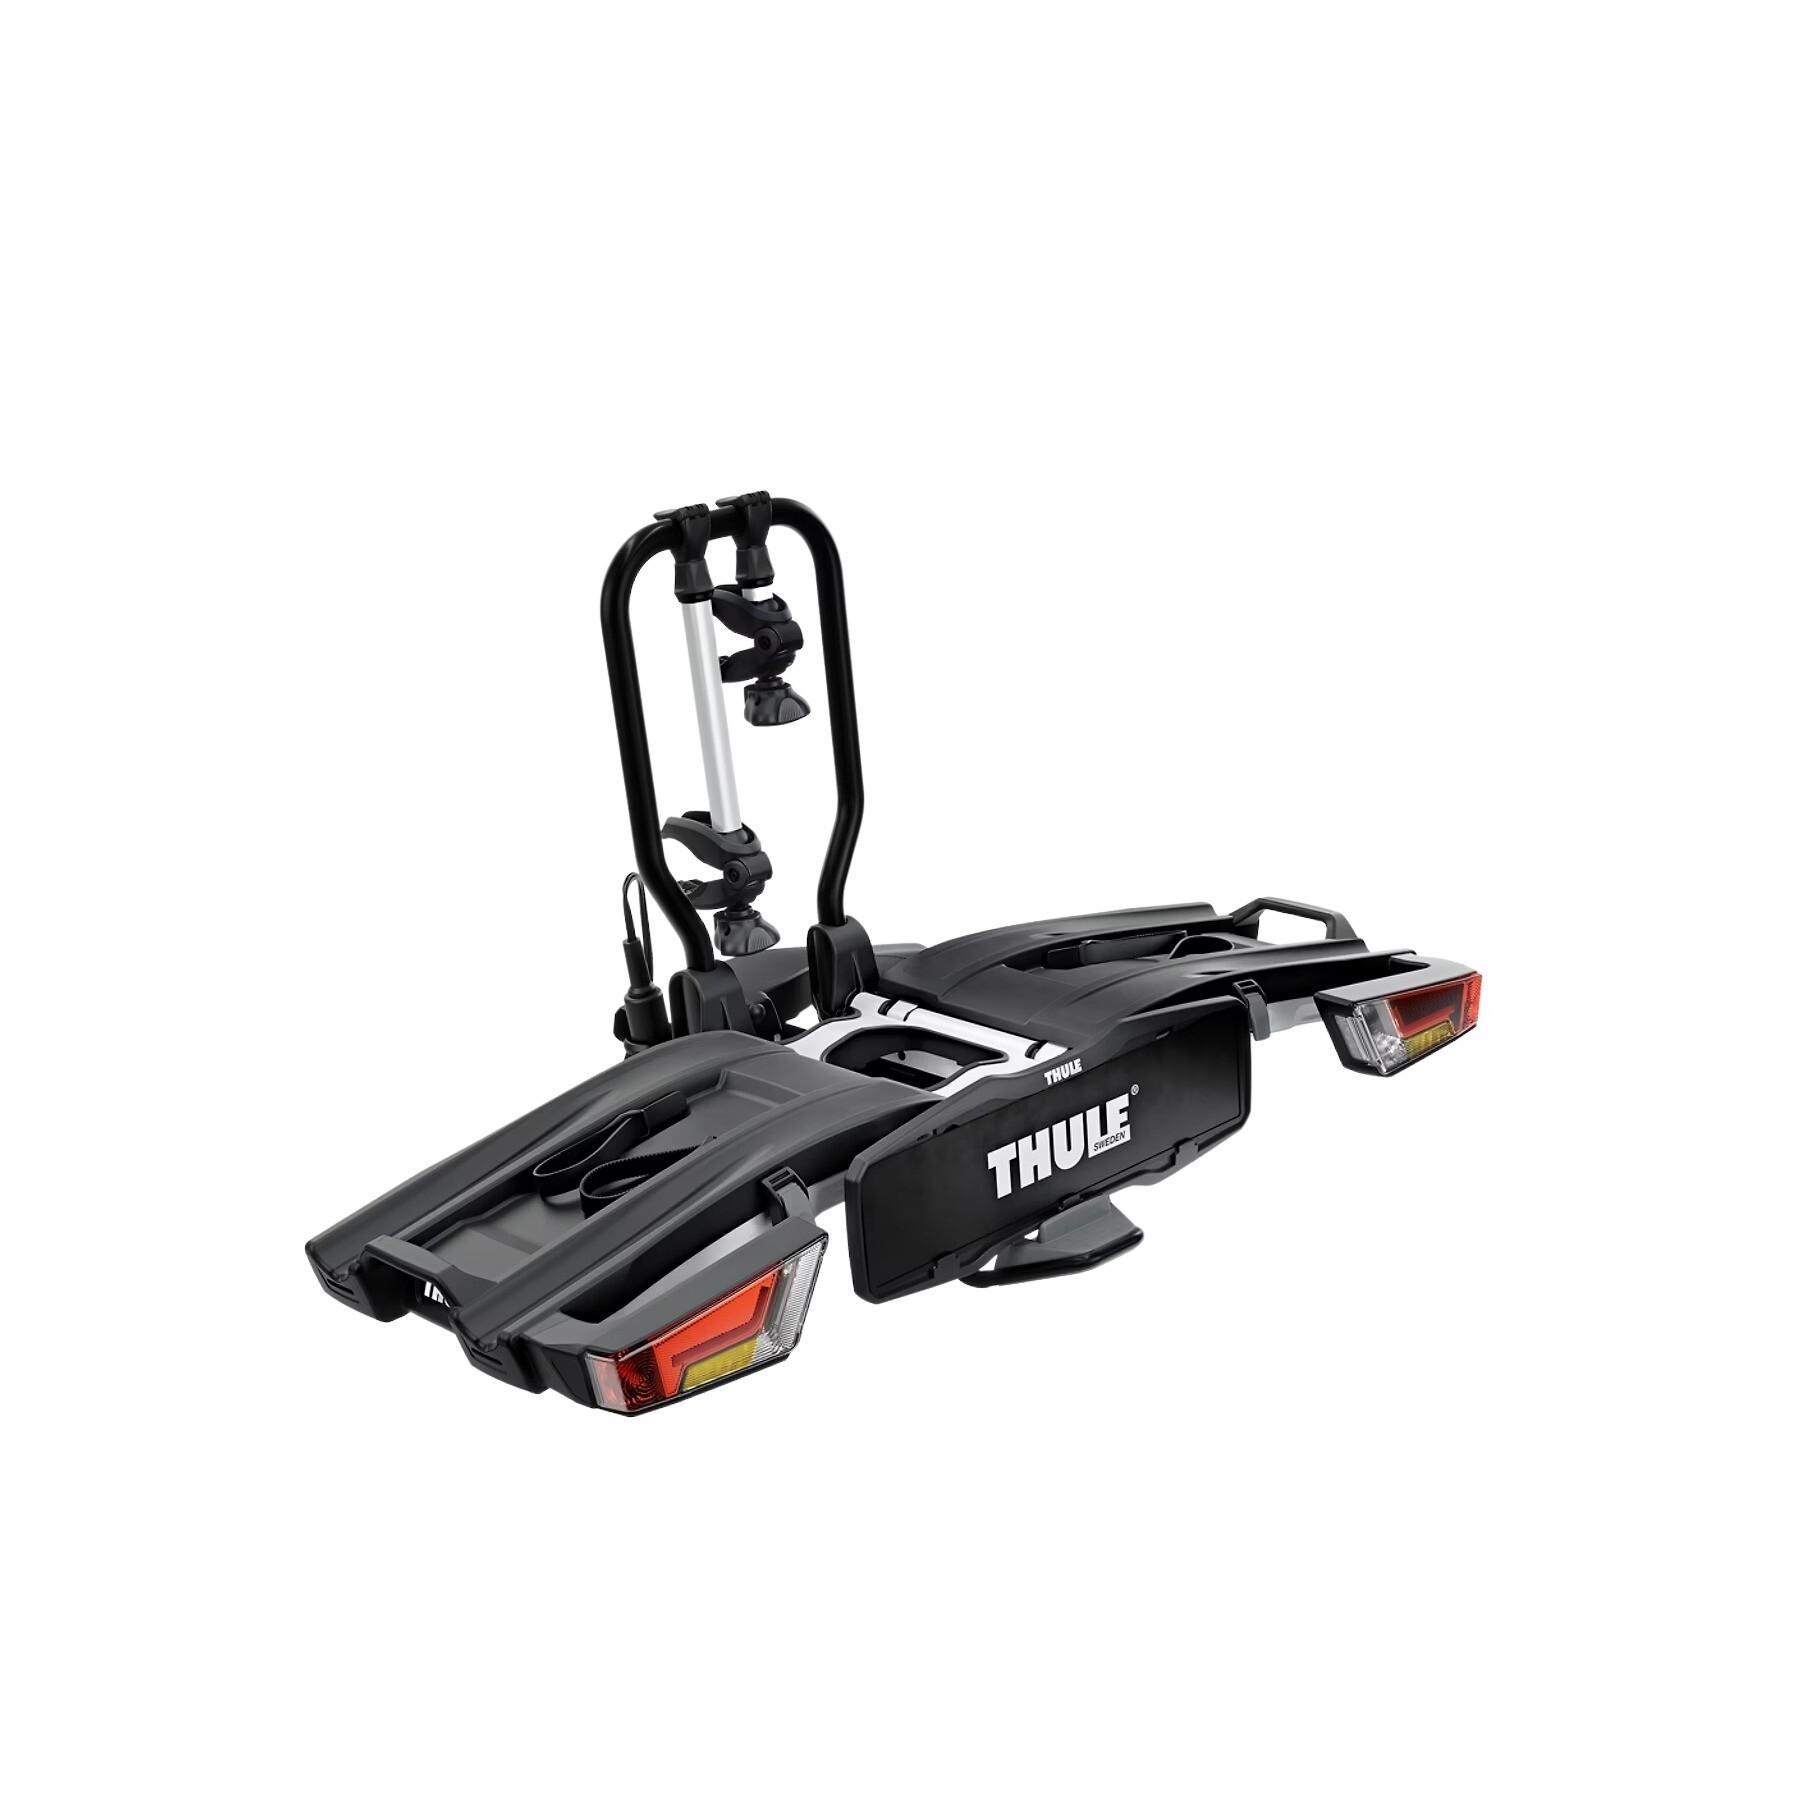 Bike carrier and trailer hitch Thule Easyfold Xt 2 Velos 13 Pin